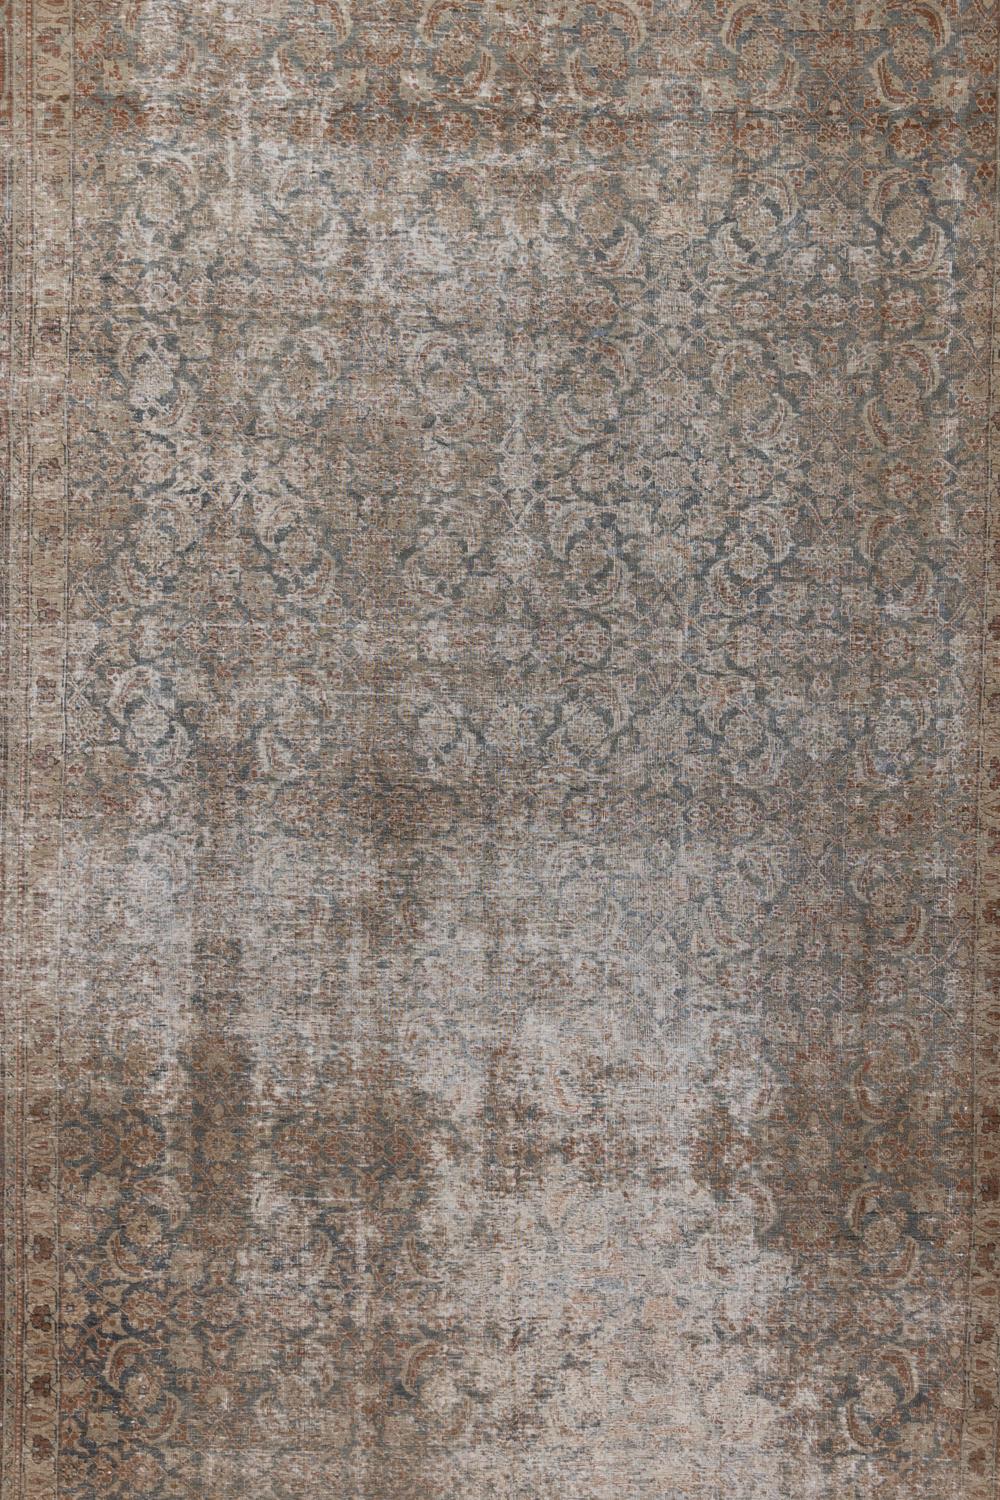 Age: early 20th century 

Pile: Low

Wear Notes: 5

Material: Wool on Cotton

Beautiful distressed Persian Tabriz with an all over herati pattern and neutral warm color way. The open field without corner brackets makes this piece